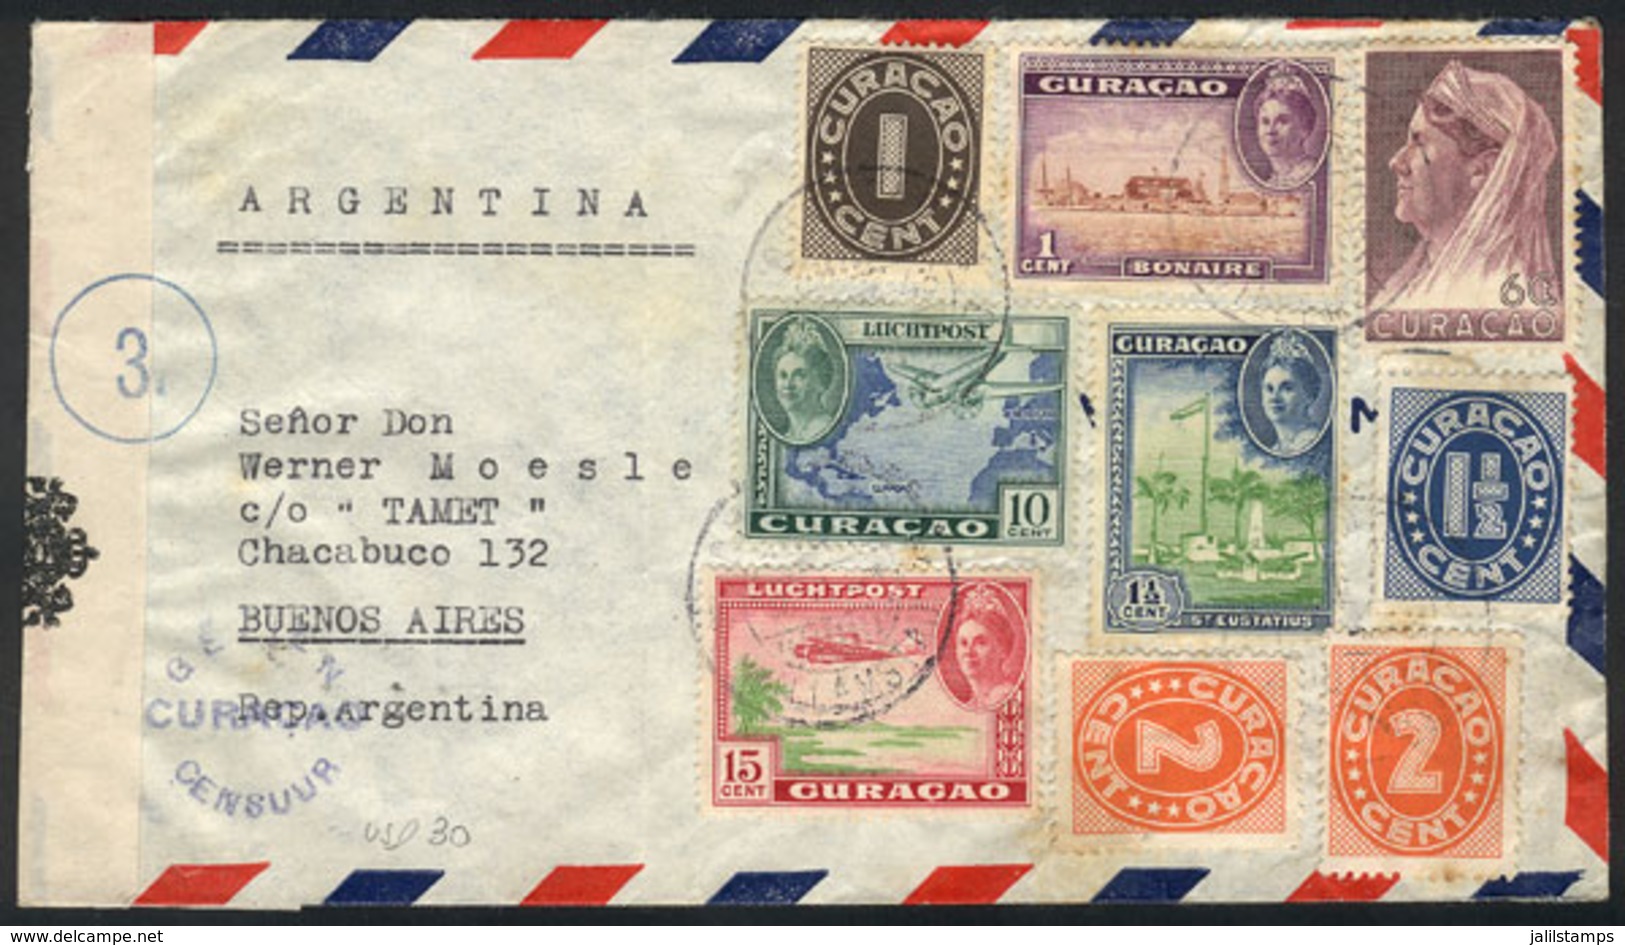 CURACAO: Airmail Cover Sent To Buenos Aires On 9/AP/1943 With Nice Multicolored Postage Of 40c. (9 Stamps) And Censored, - Curazao, Antillas Holandesas, Aruba